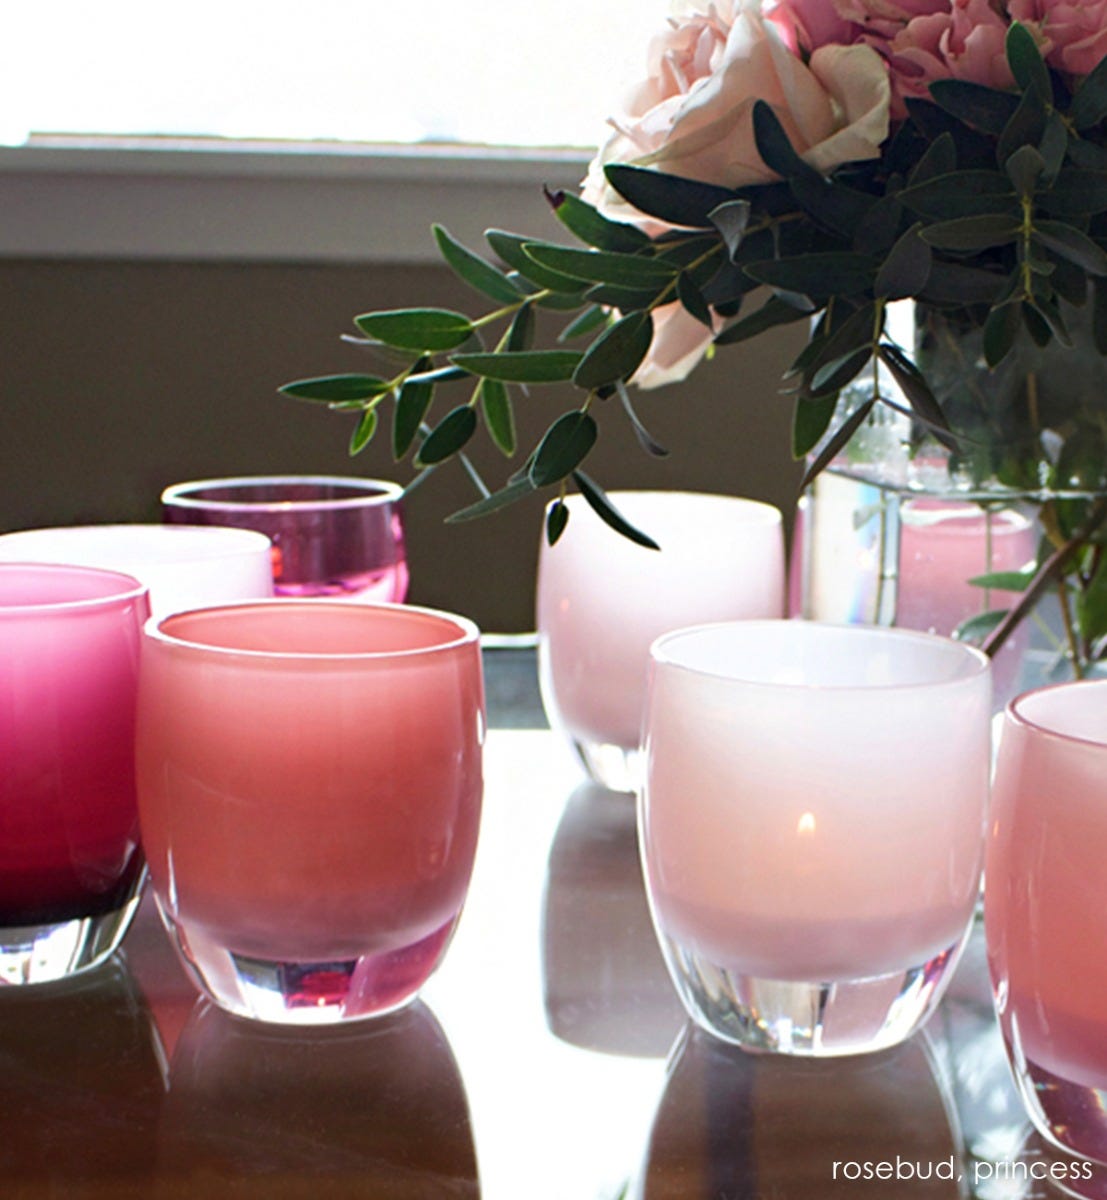 princess soft pink hand-blown glass votive candle holder. Paired with rosebud.